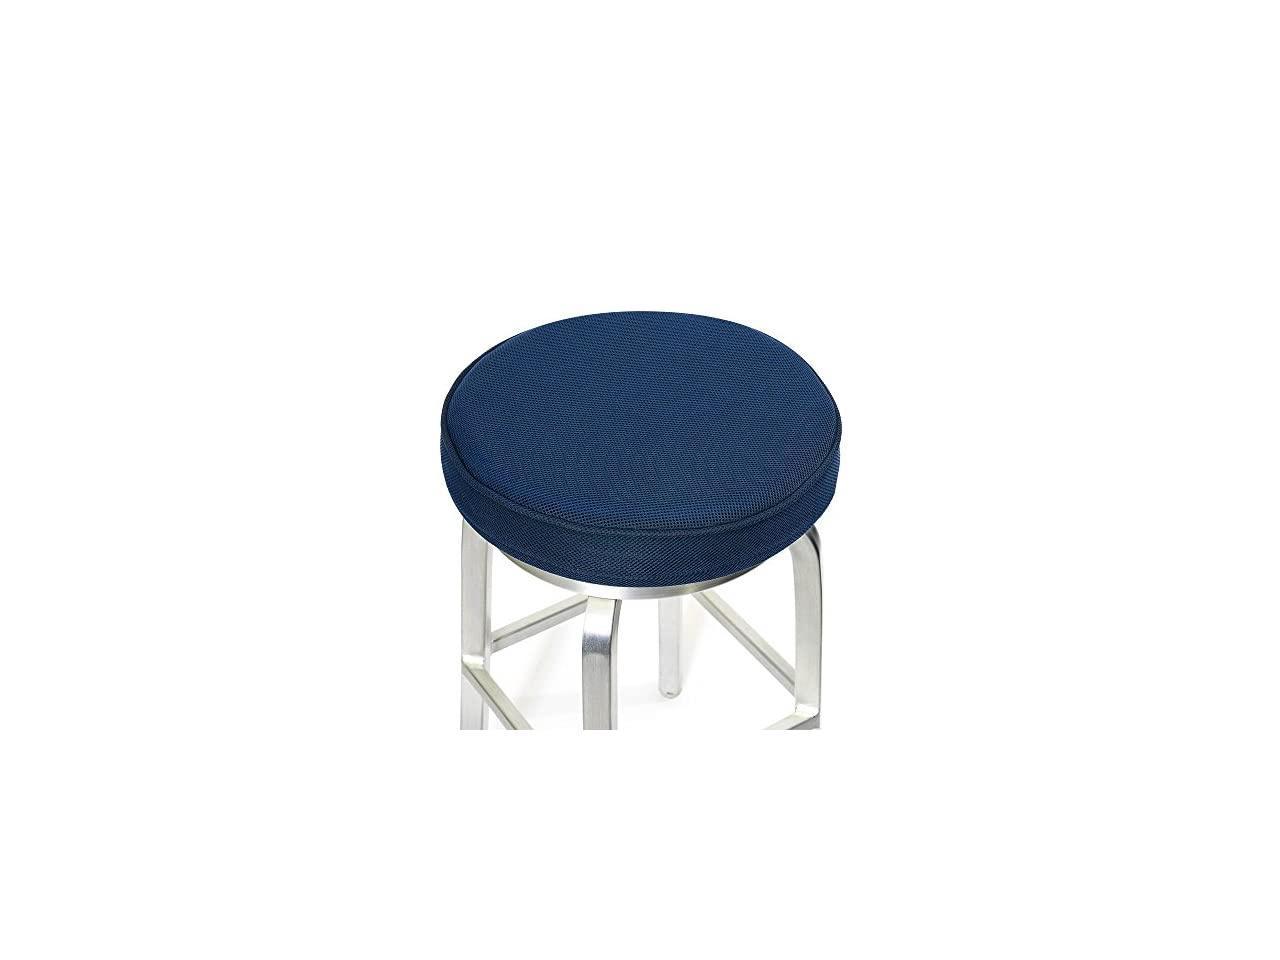 Elastic Bar Stool Covers Round Chair Seat Cover Washable Cushions Protector 